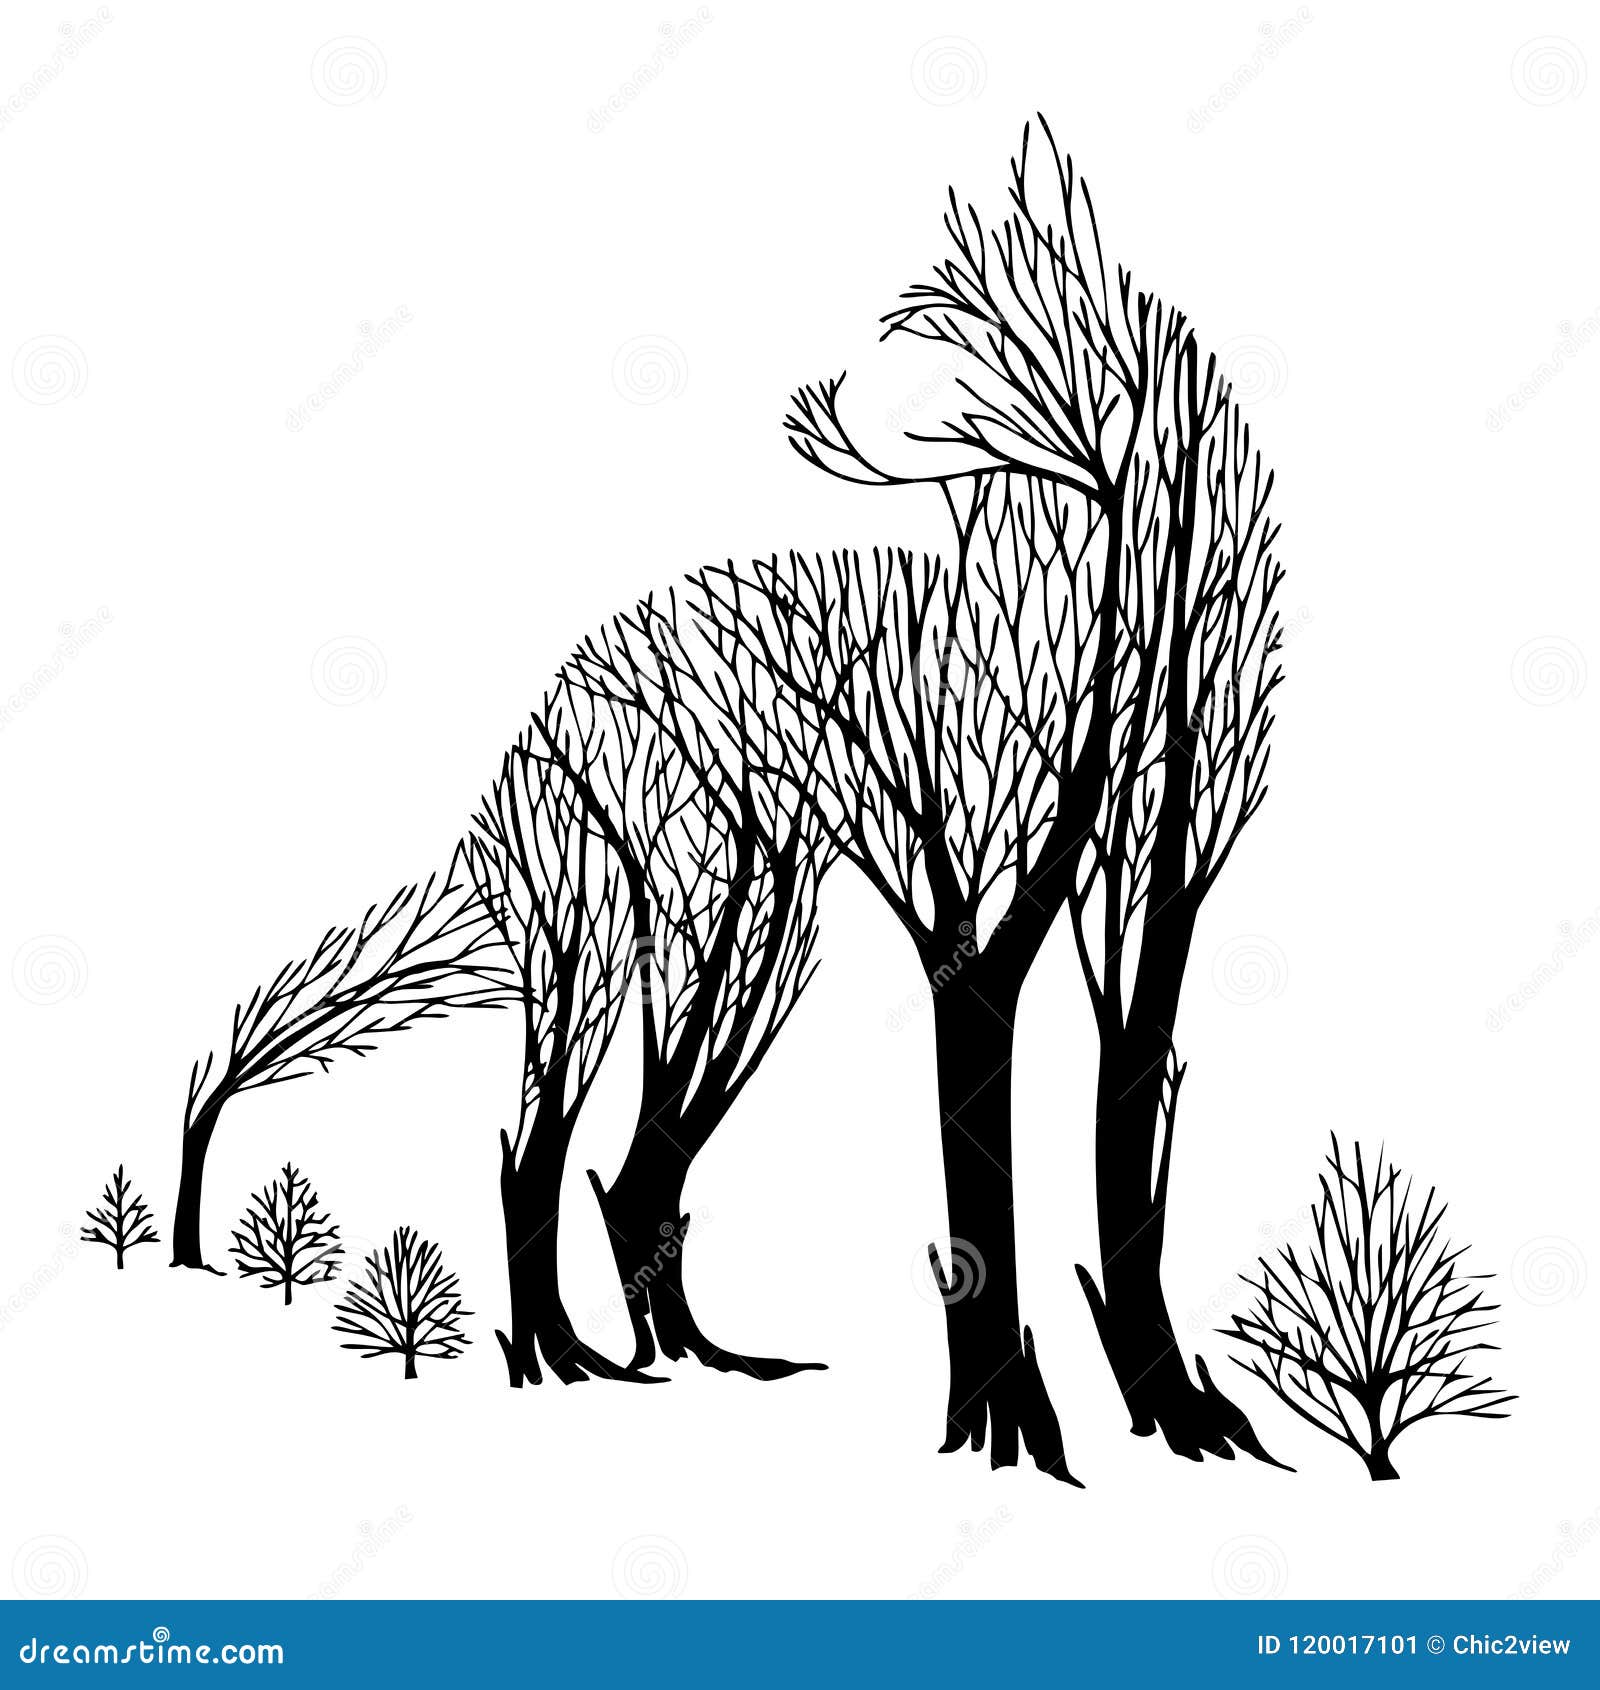 Mysterious Aggressive Wolf Look Back Silhouette Double Exposure Blend Tree  Drawing Tattoo Stock Illustration - Illustration of double, background:  120017101